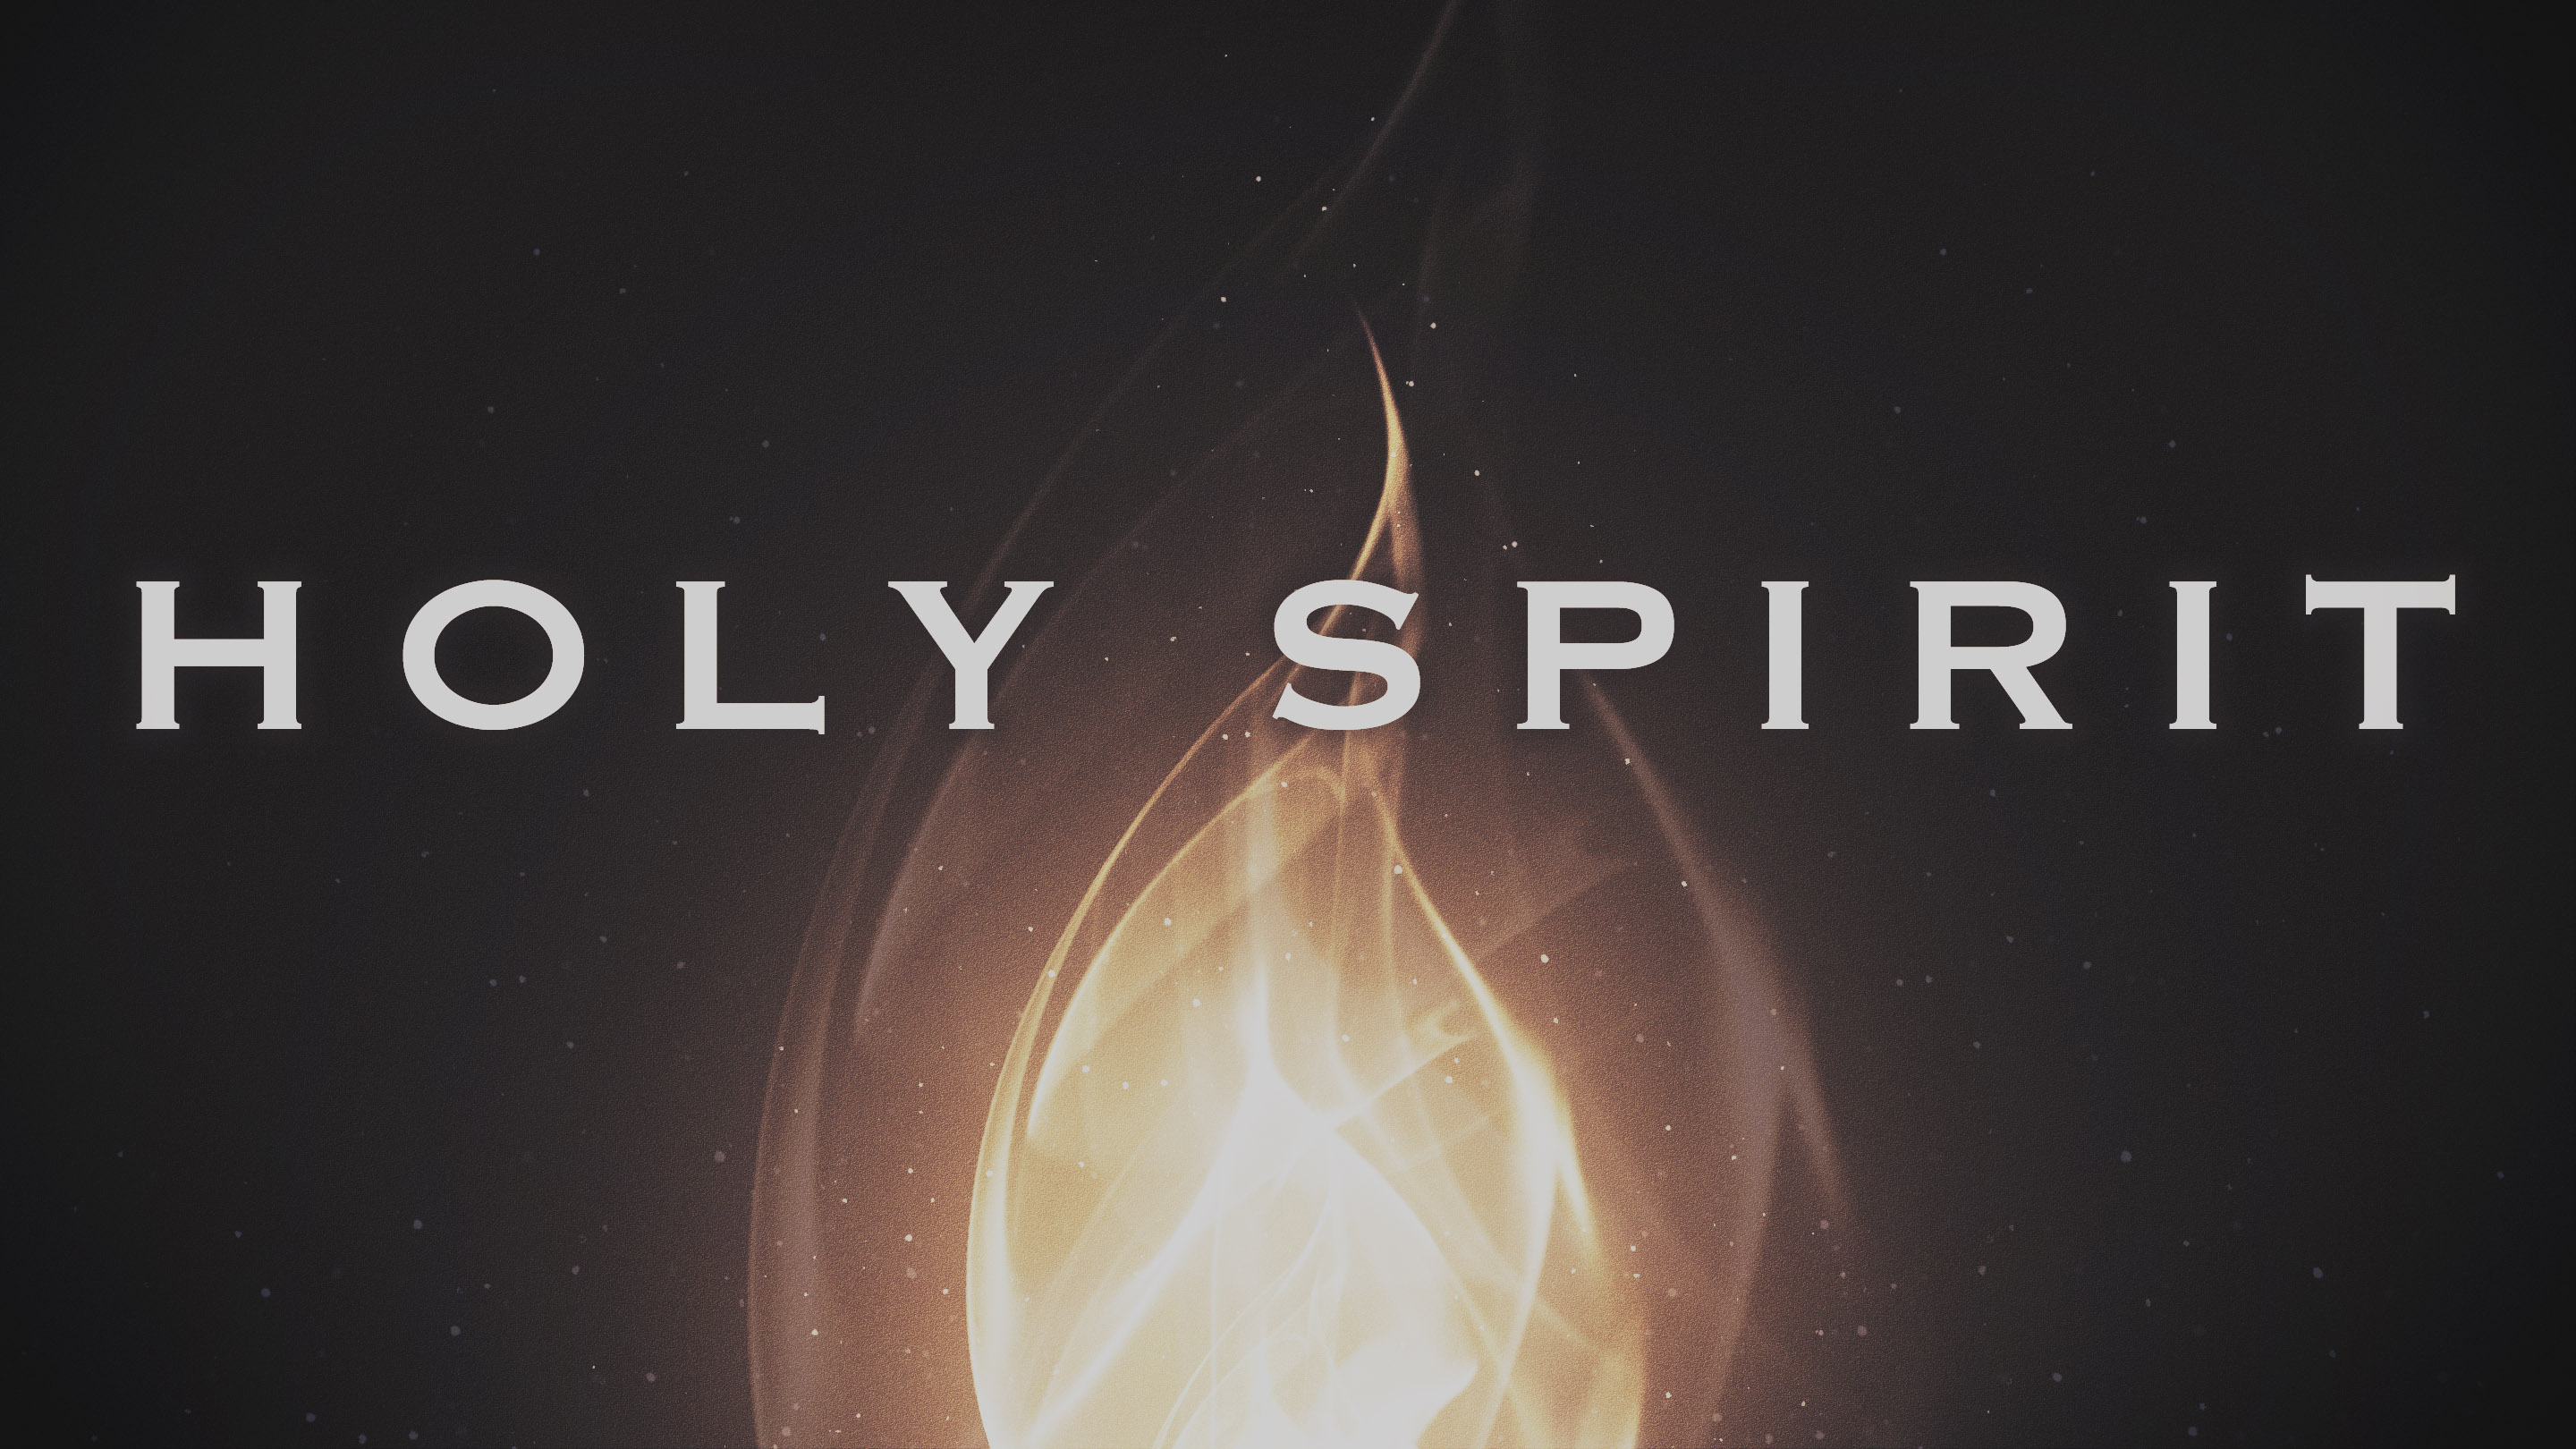 Holy Spirit 2017part 9 (The Gifts)